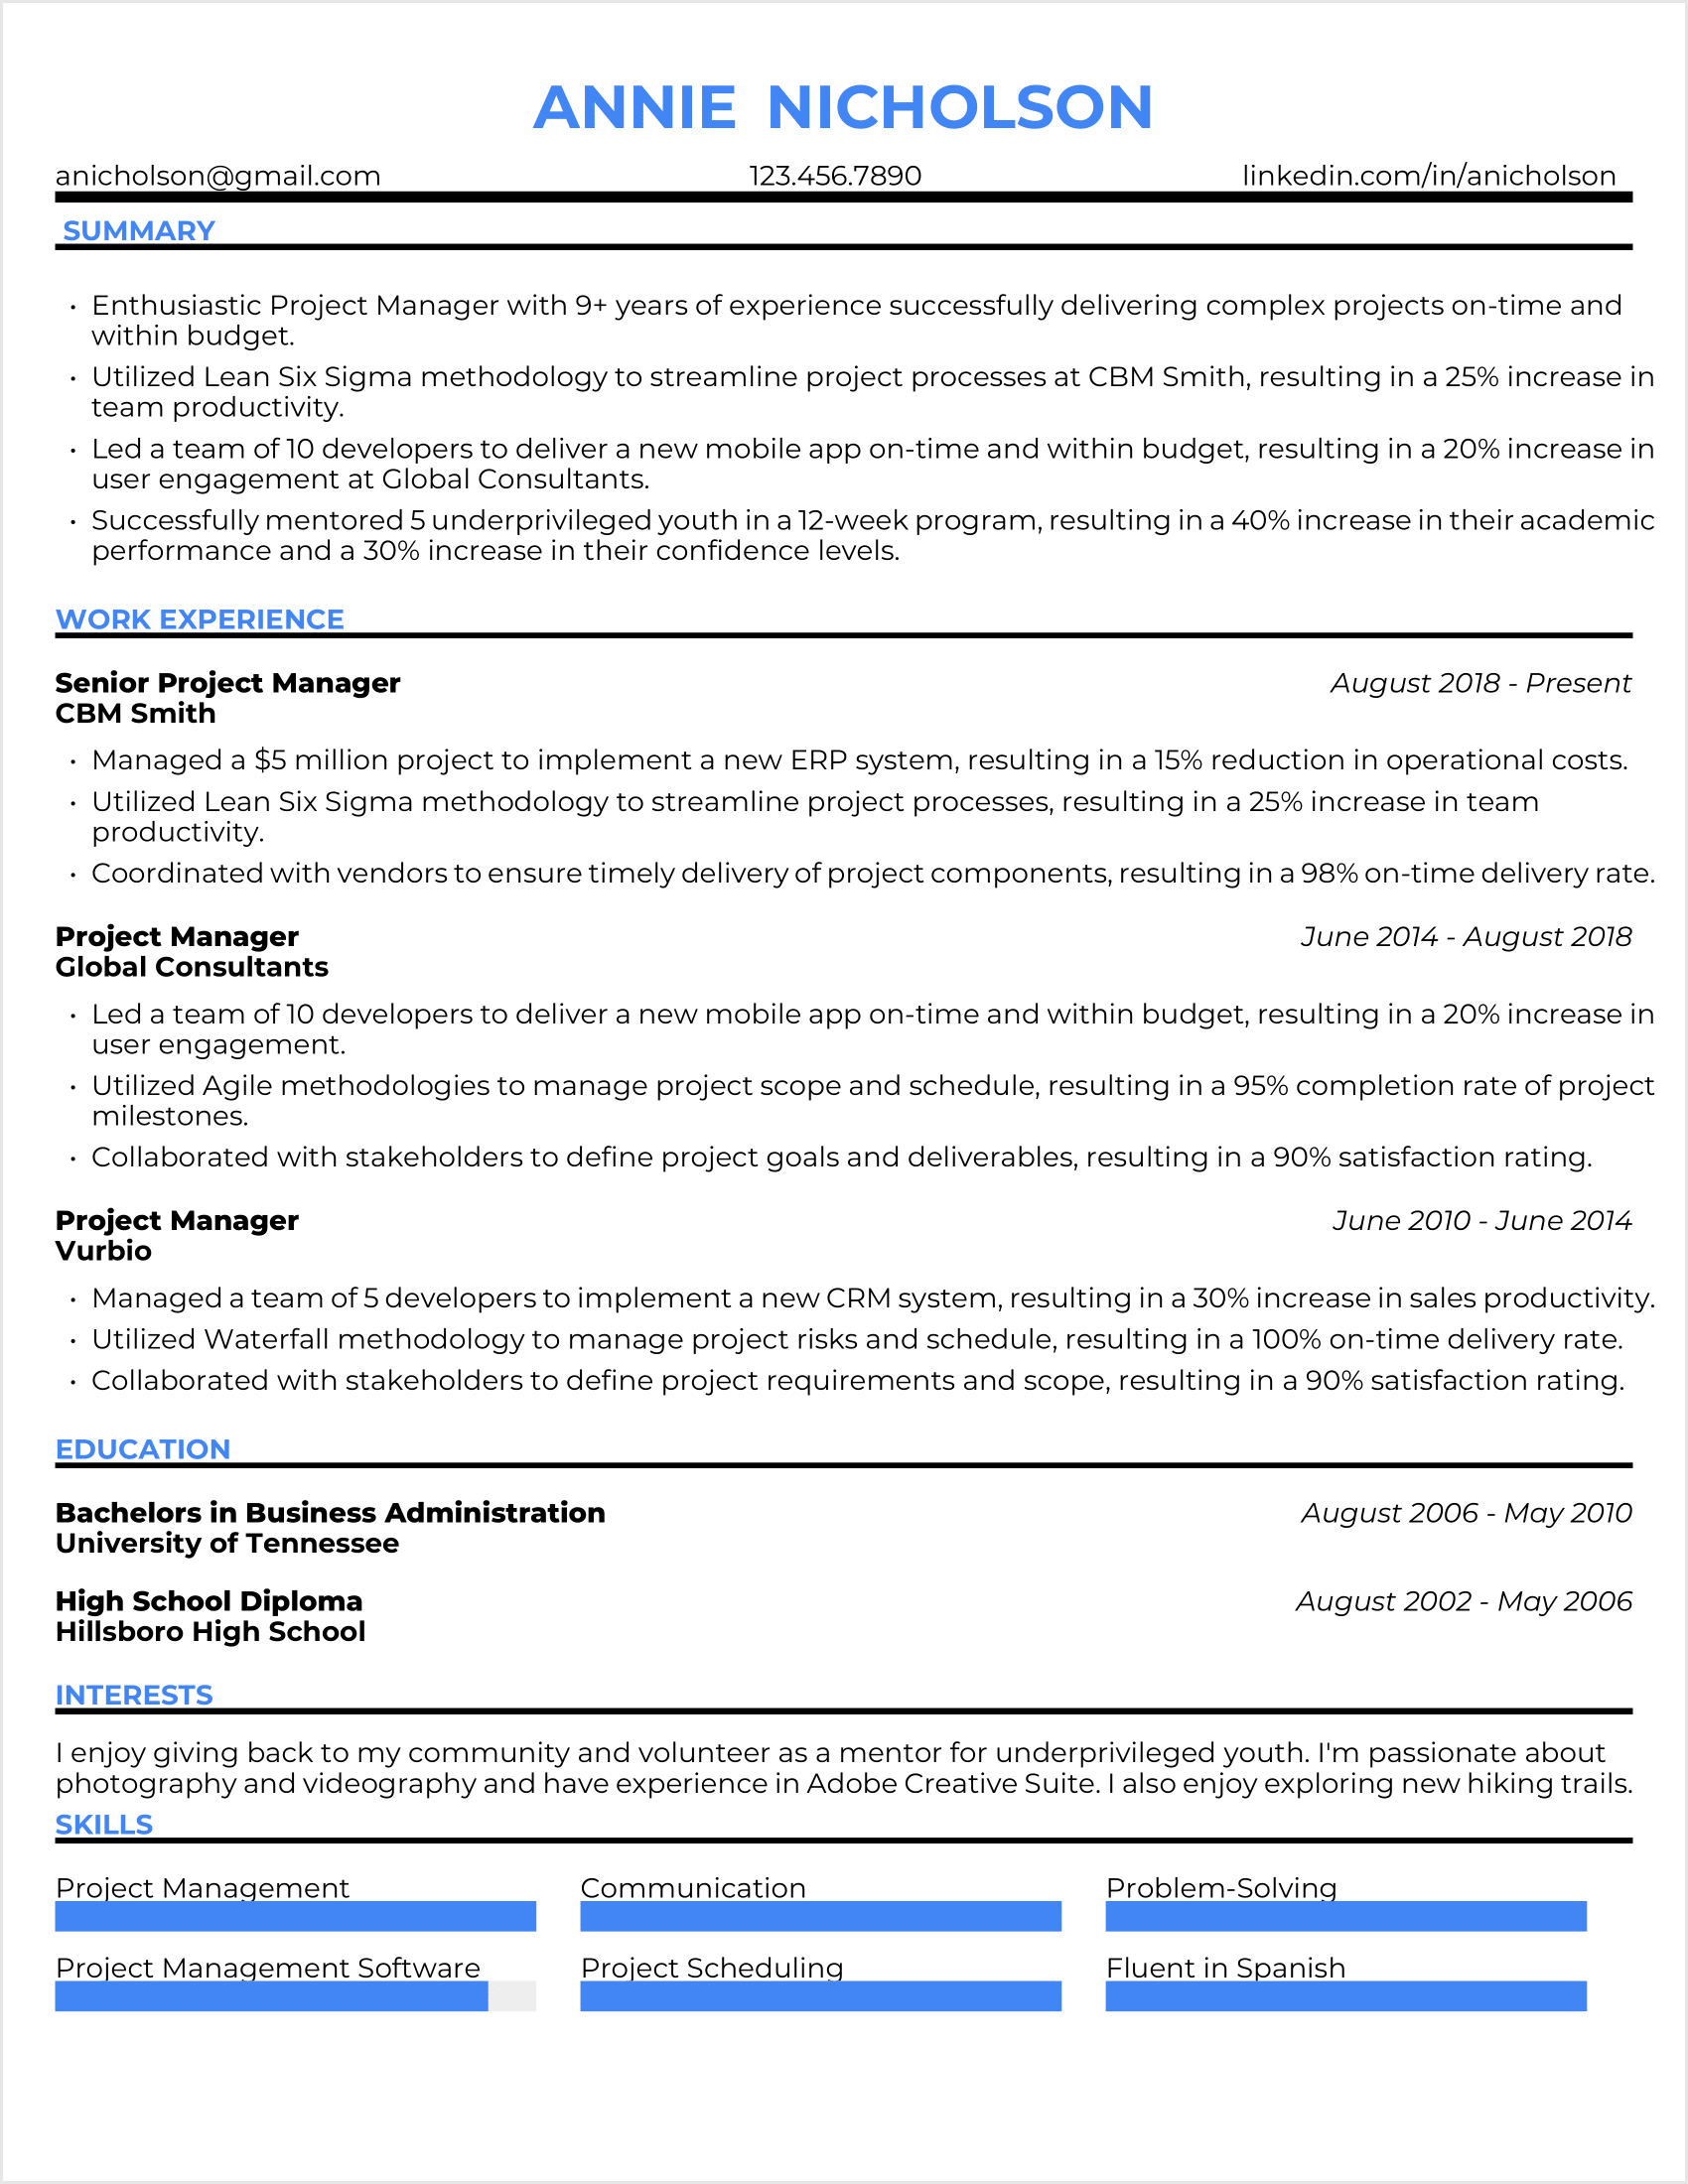 Project Manager Resume Example #1